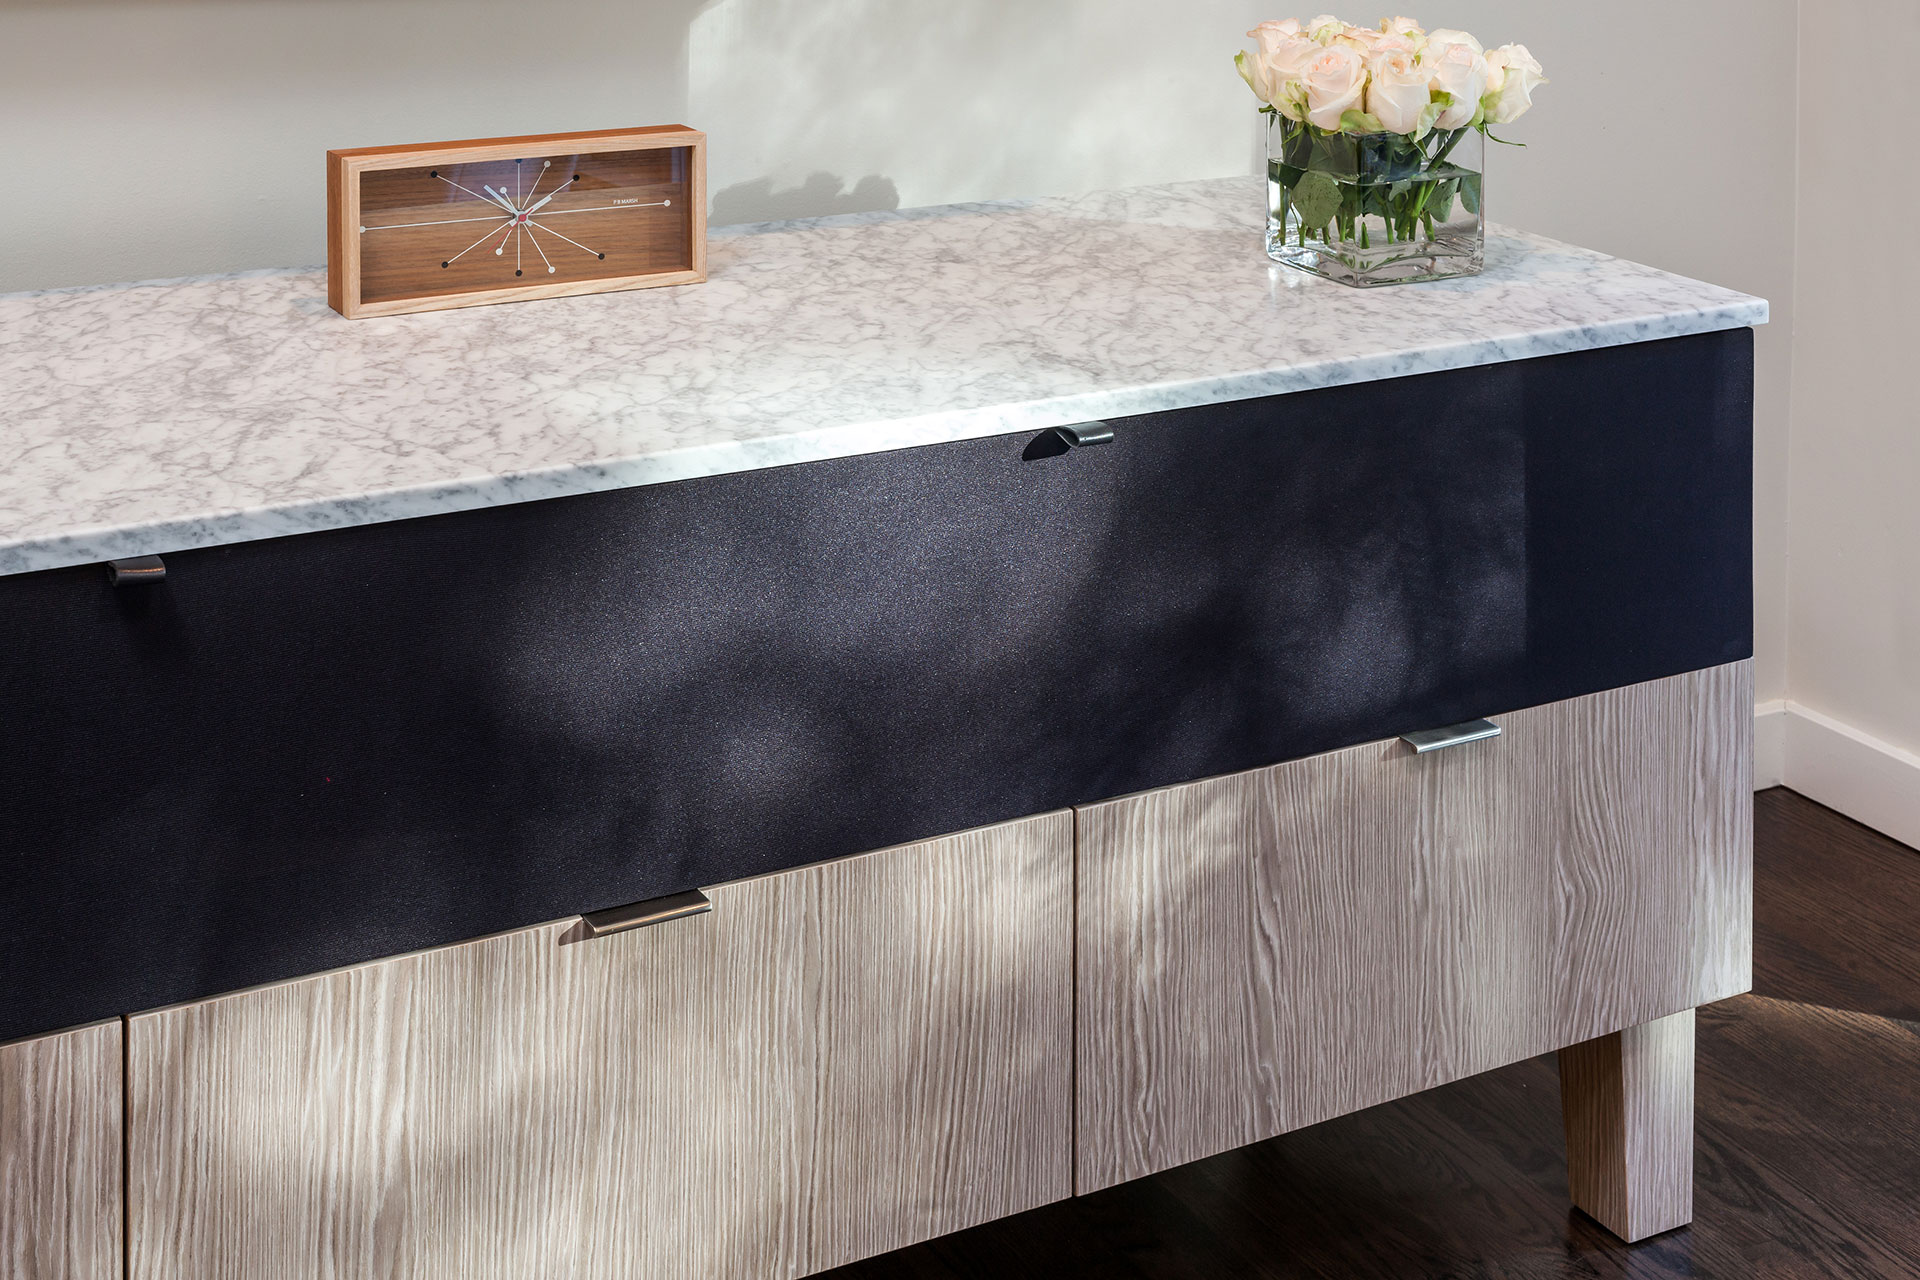 Carrara marble and white oak are used to create a custom stereo cabinet in this mid-century modern remodel.